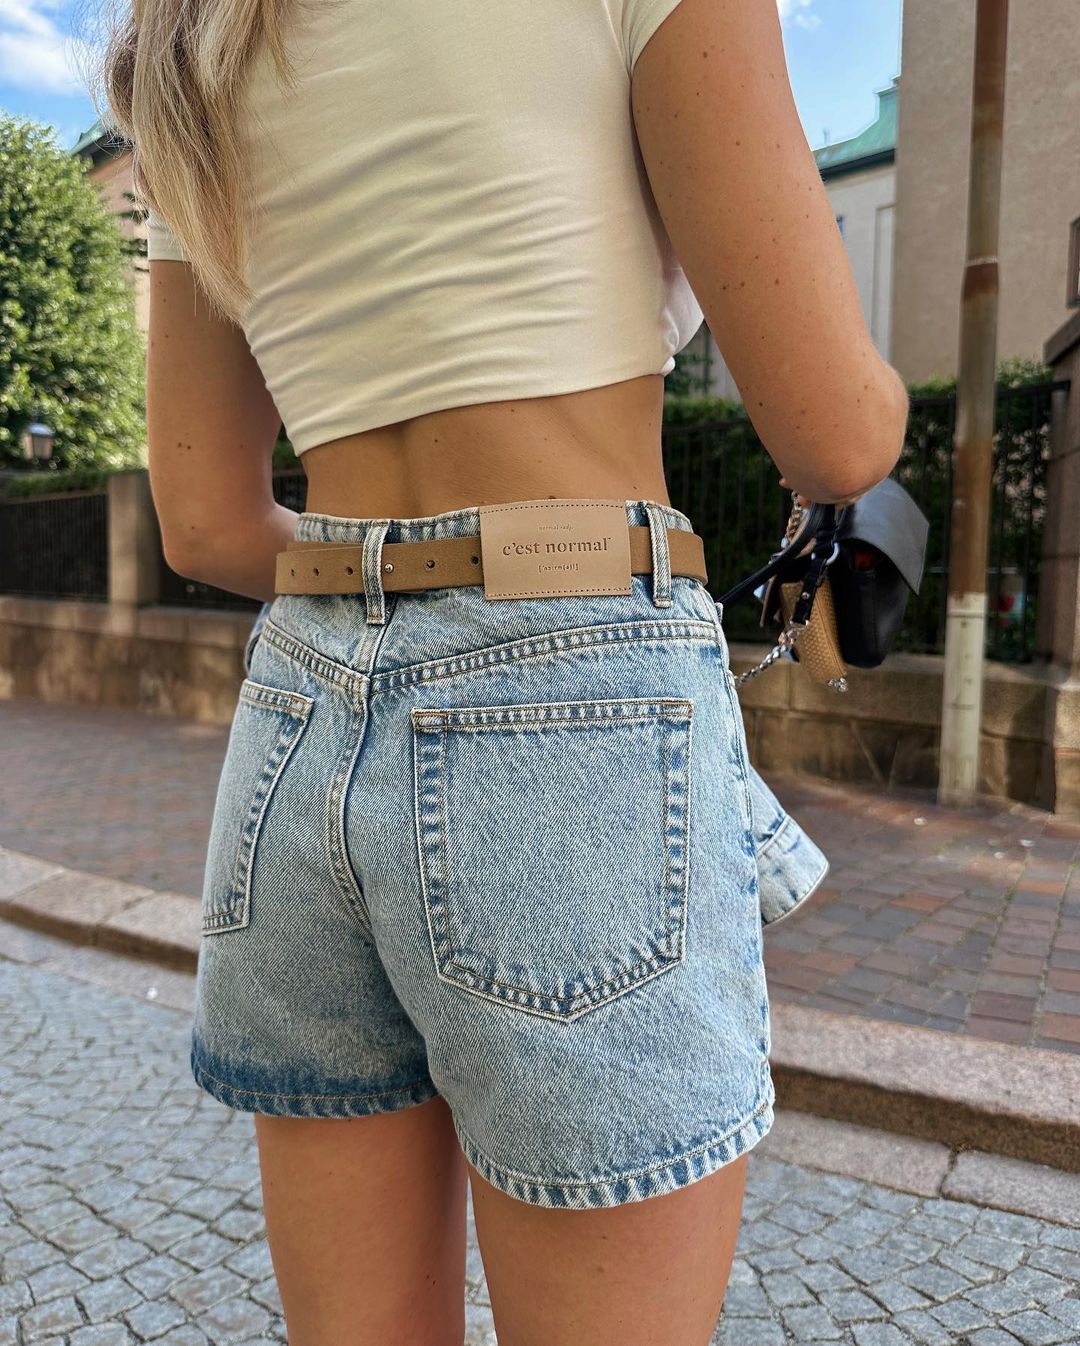 Details more than 211 crop top with denim shorts